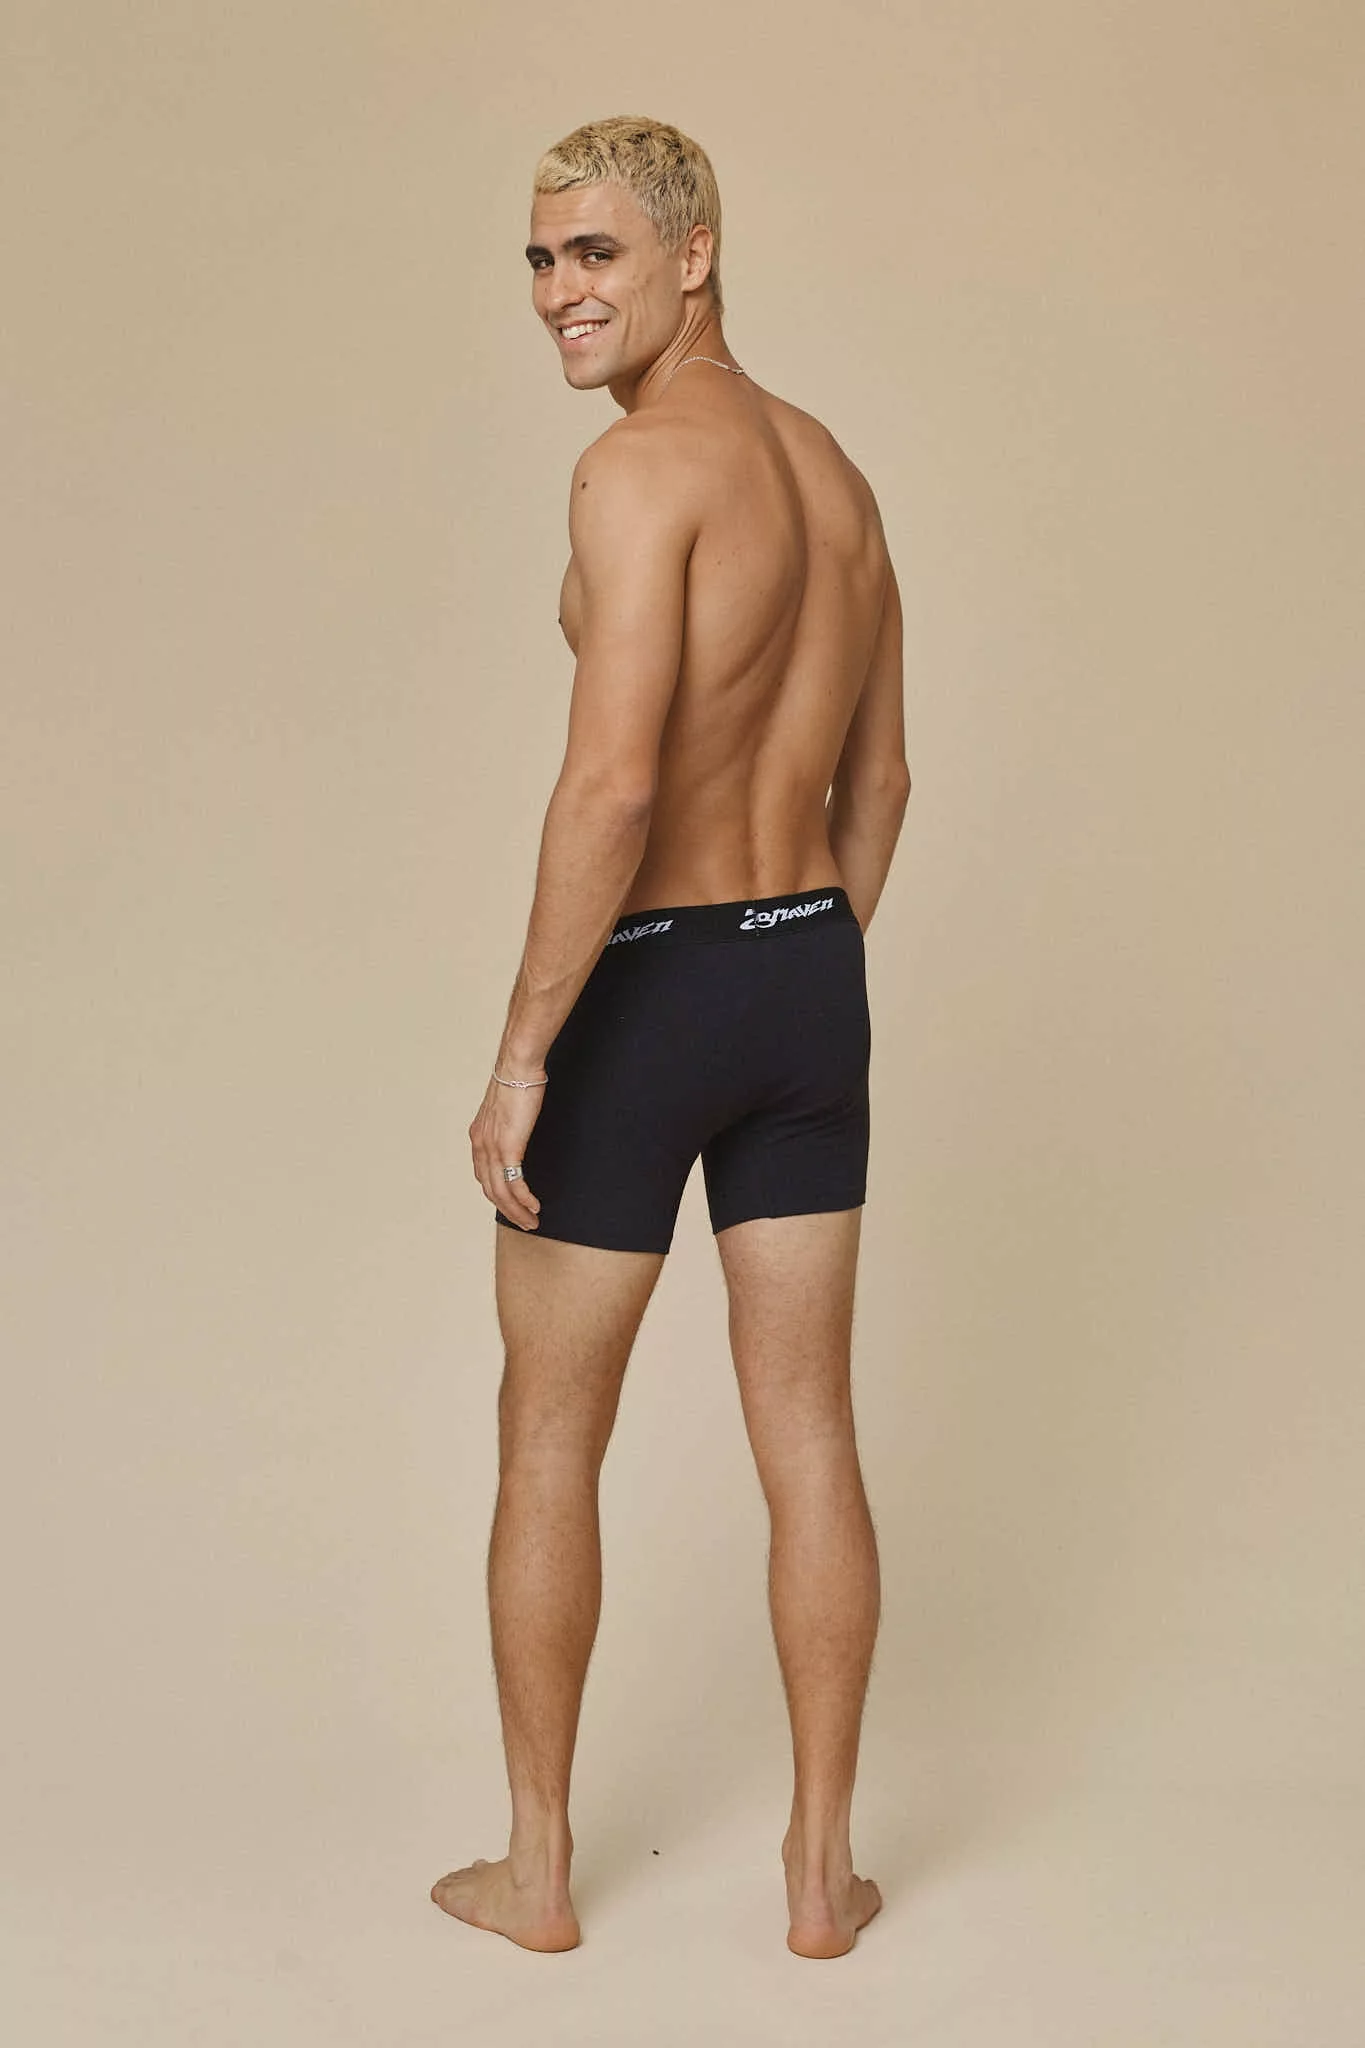 Workout Underwear: 7 Best Pairs For Every Type Of Exercise – WAMA Underwear